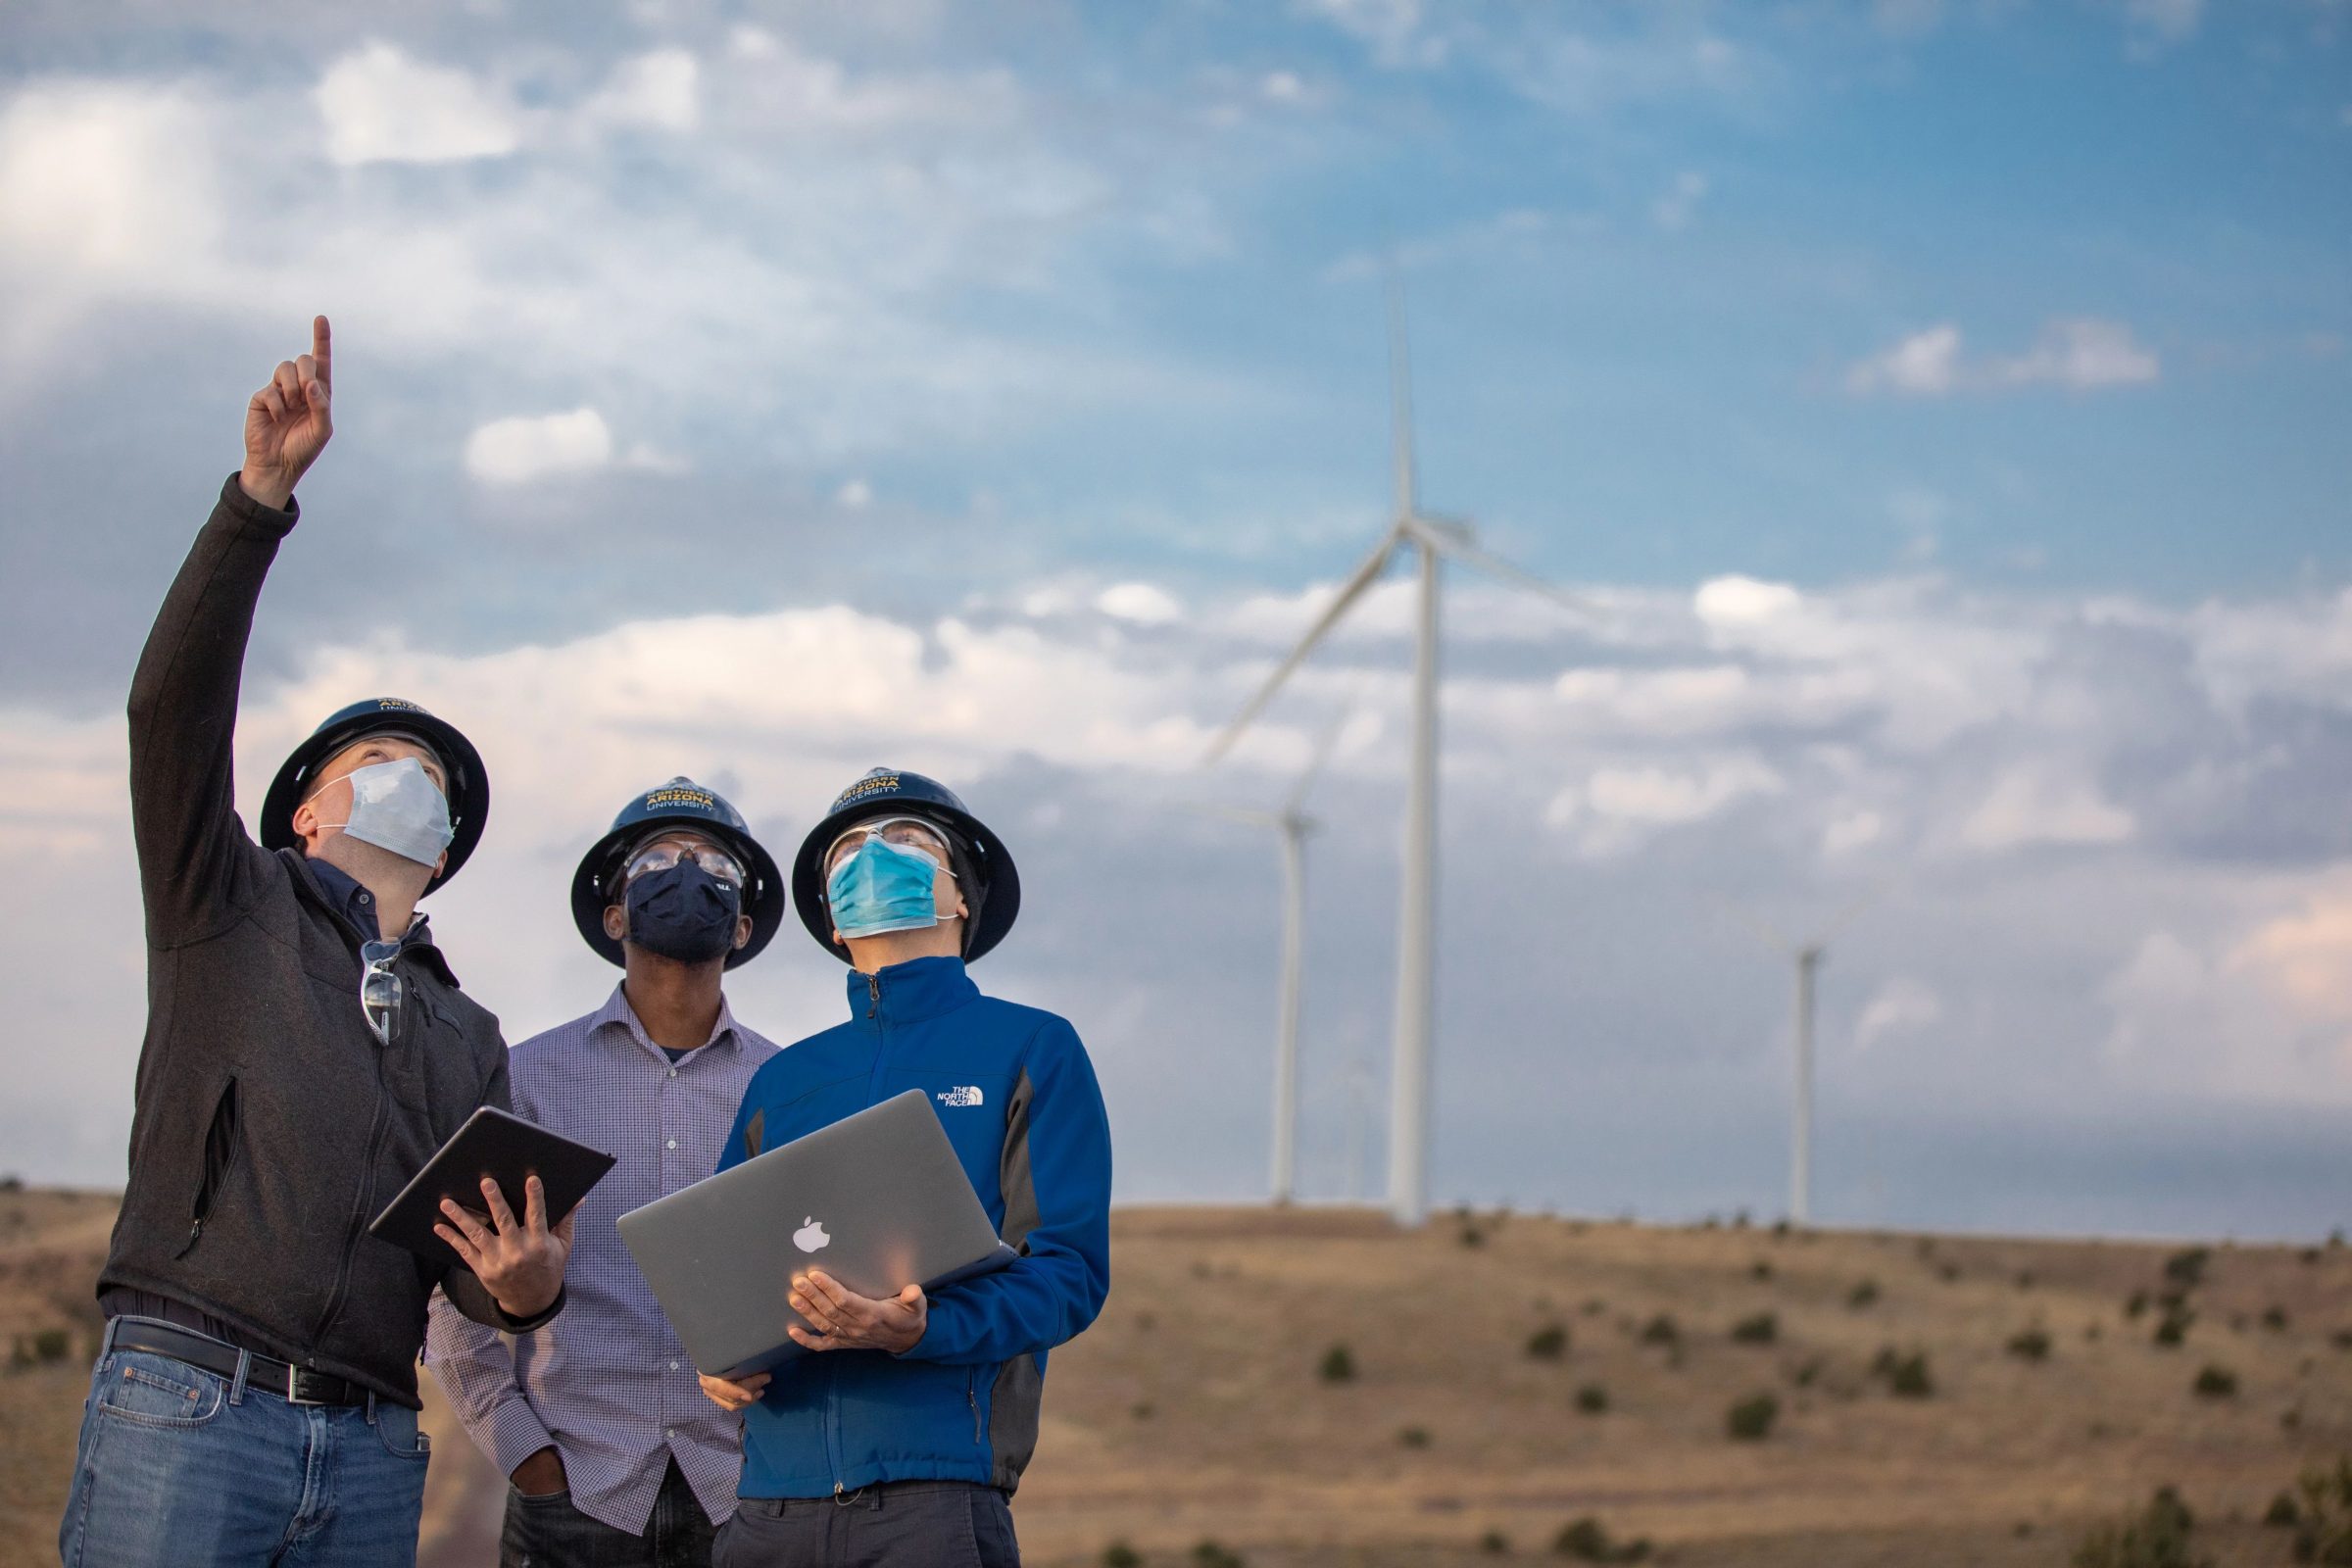 Three people looking up at a wind turbine--one person is pointing up with their arm extended-- behind them, in the distance, are other turbines.